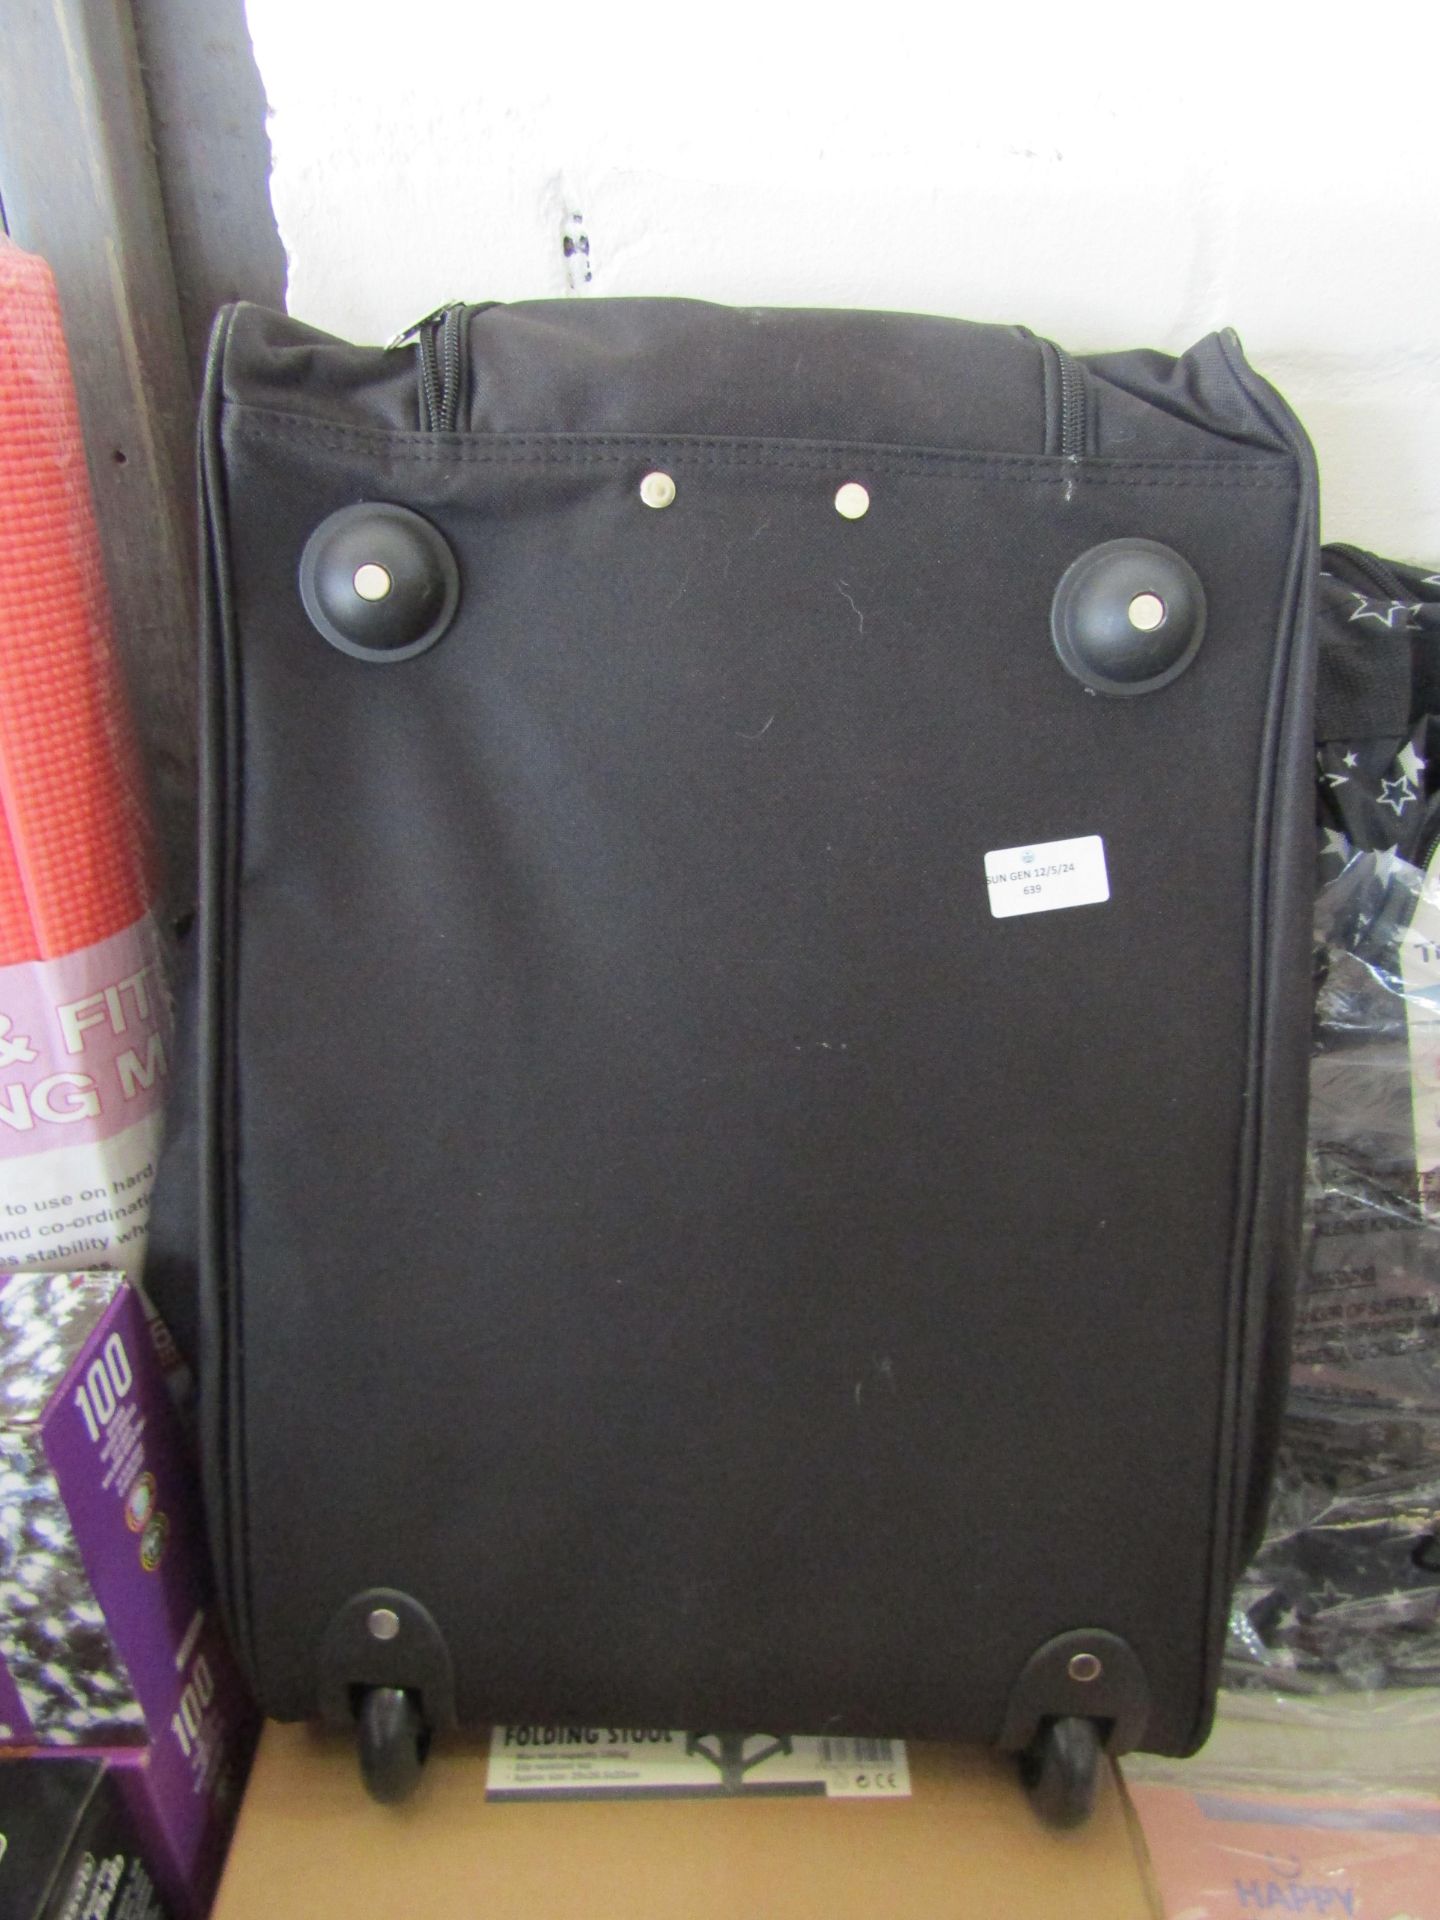 Asab Travel Case, Unchecked & No Package.